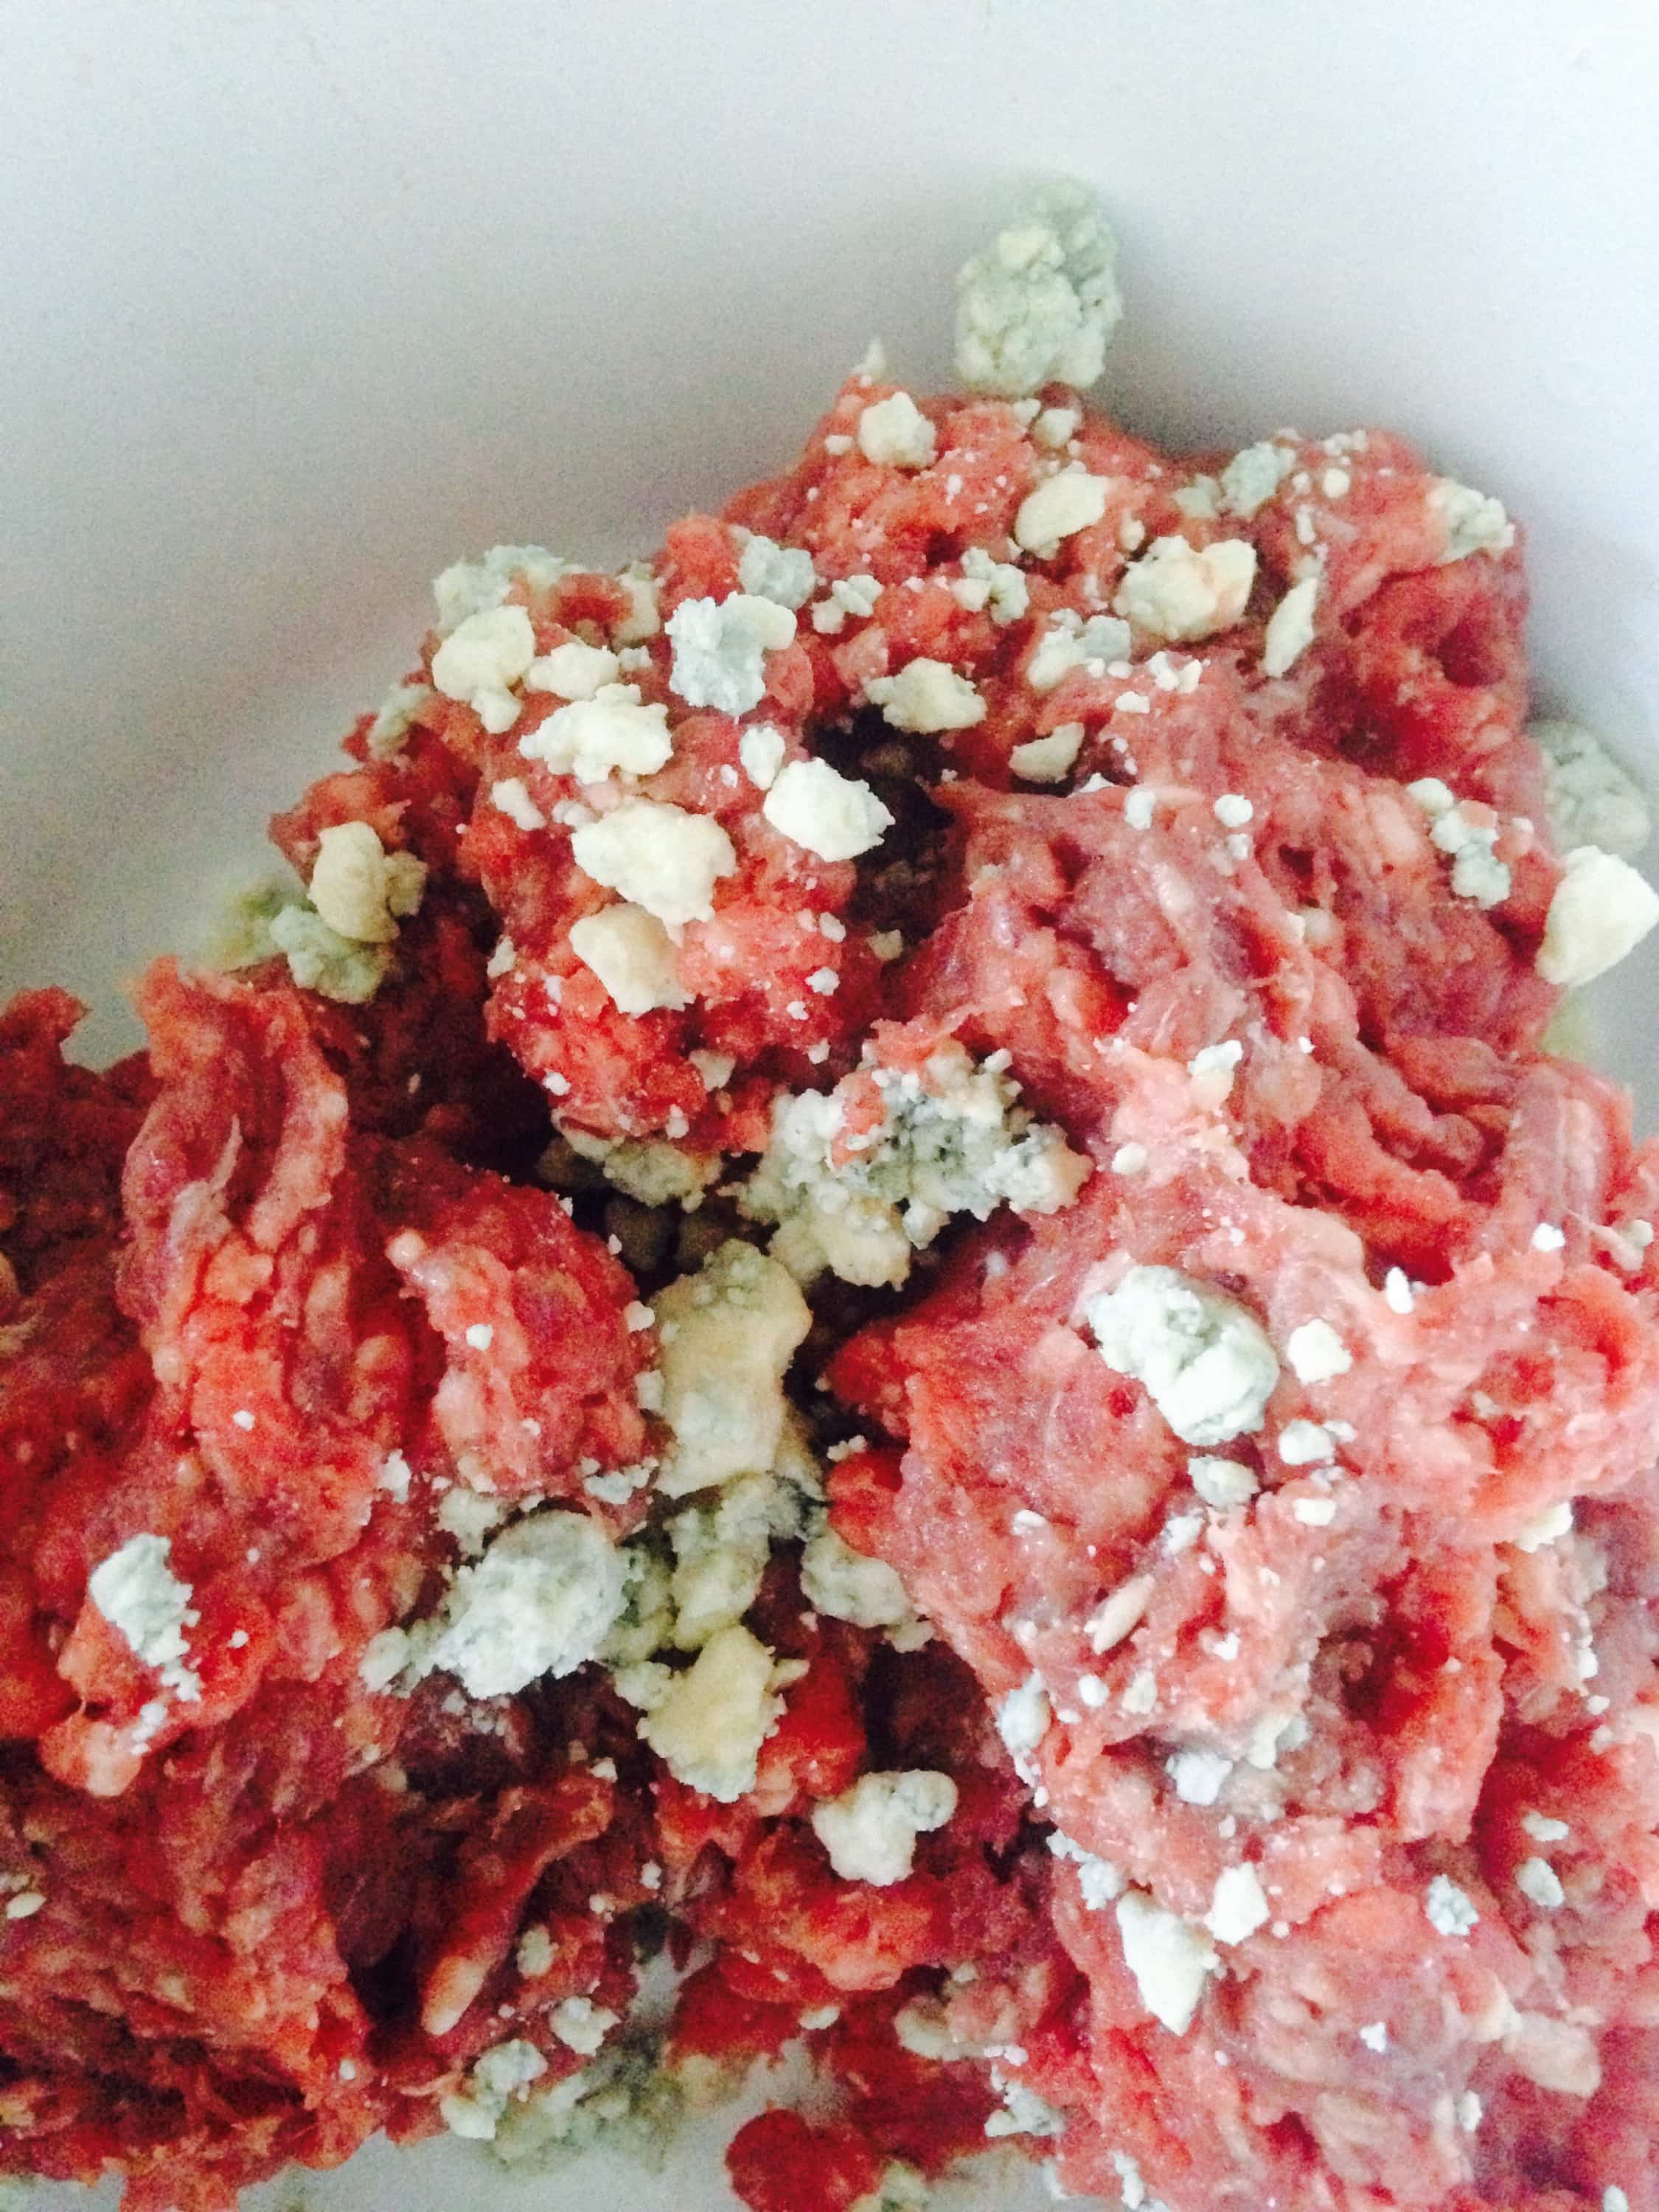 raw ground sirloin with blue cheese crumbles in a bowl